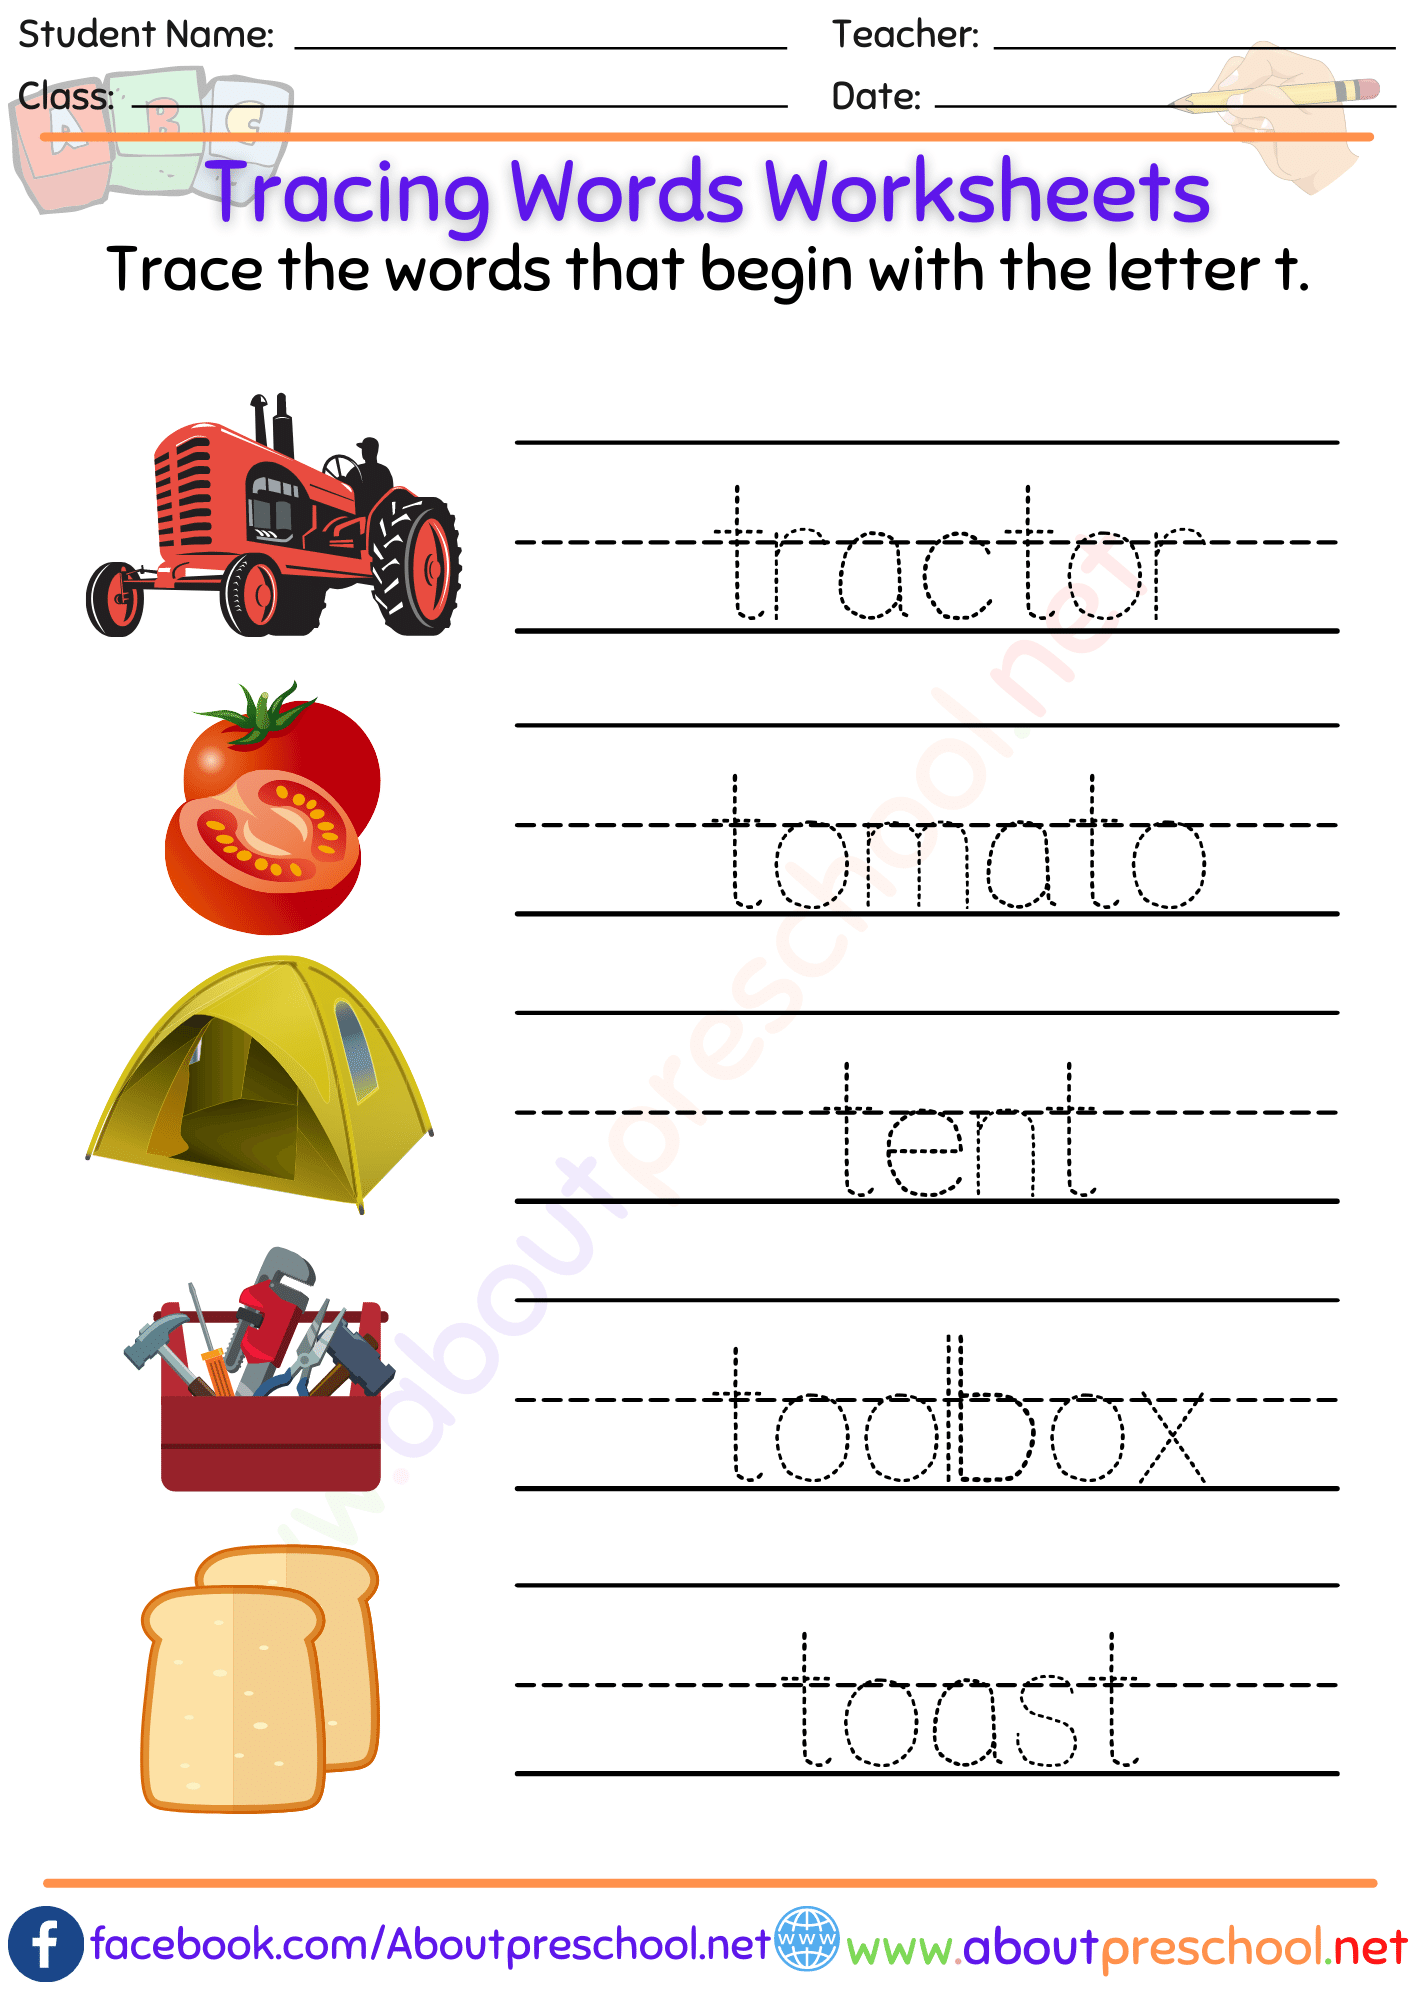 Tracing Words Worksheets-t